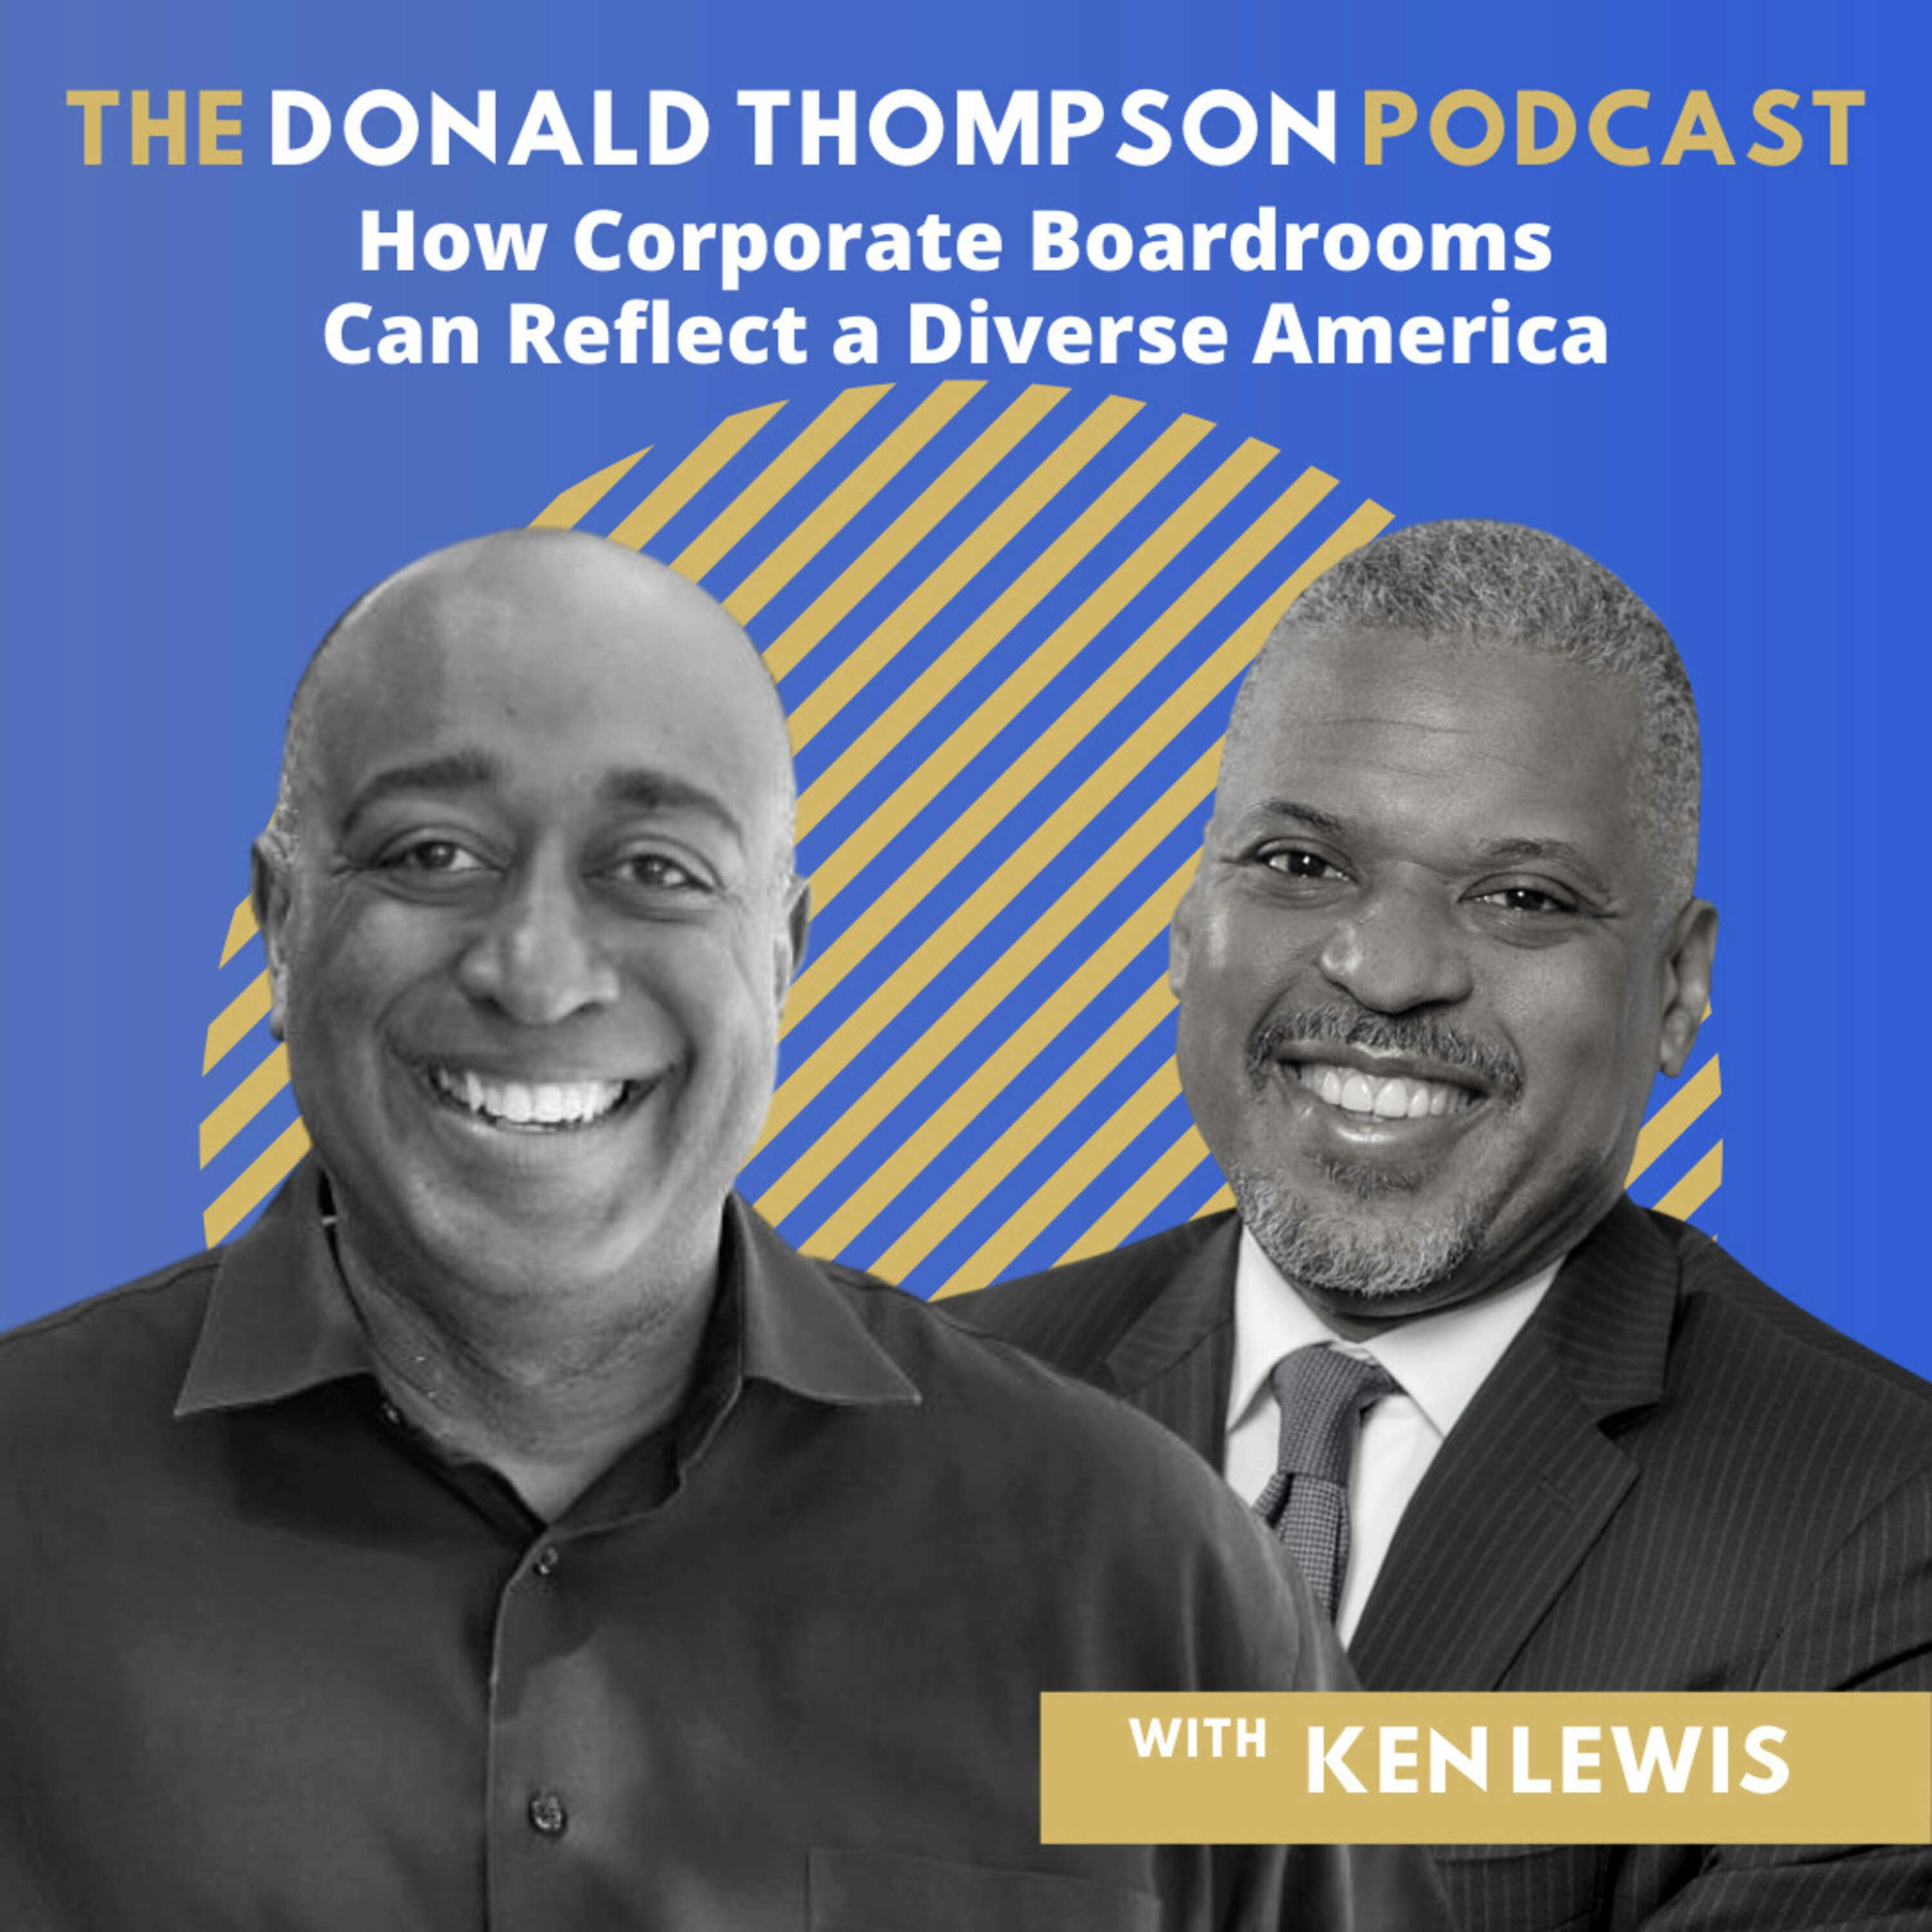 How Corporate Boardrooms Can Reflect a Diverse America, with Attorney Ken Lewis